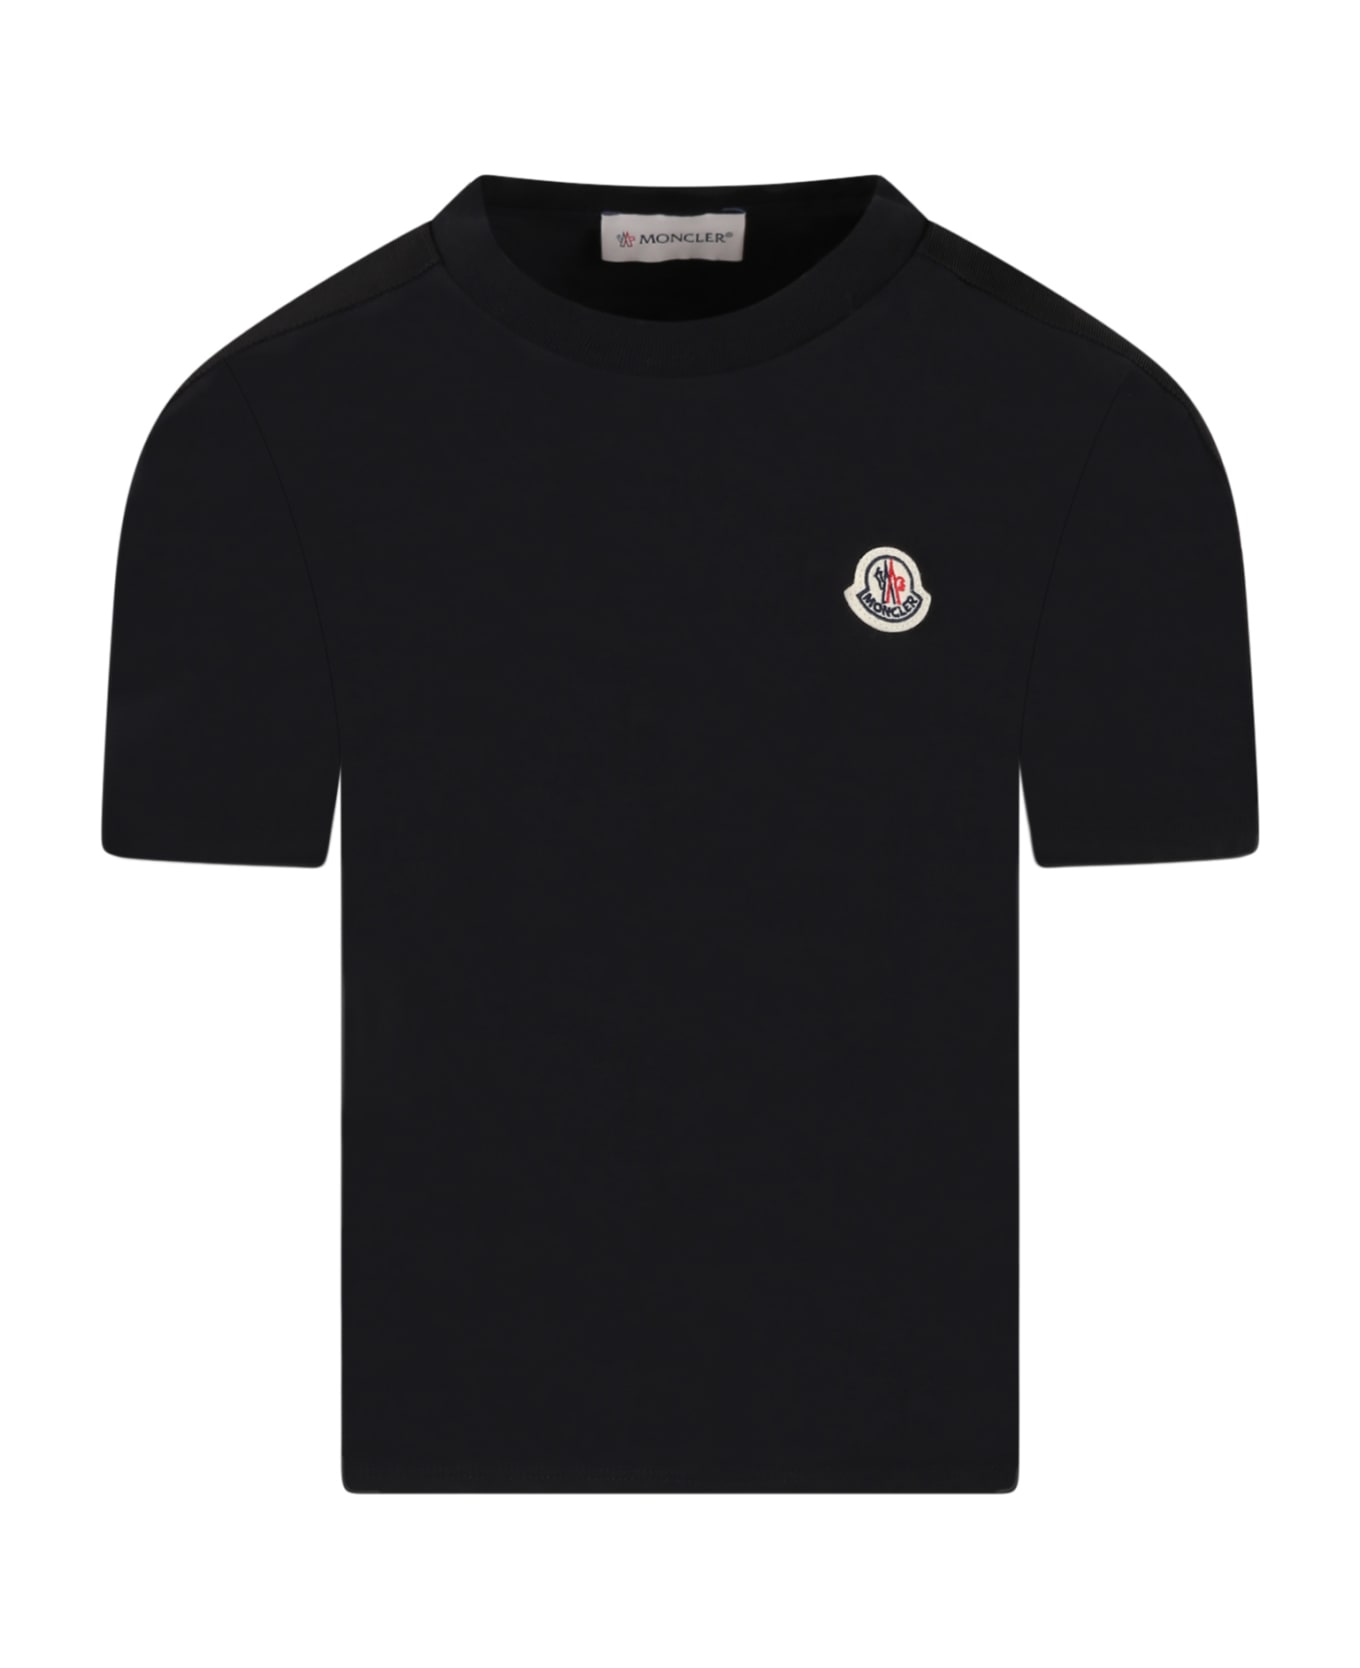 Moncler Blue T-shirt For Kids With Patch - Black